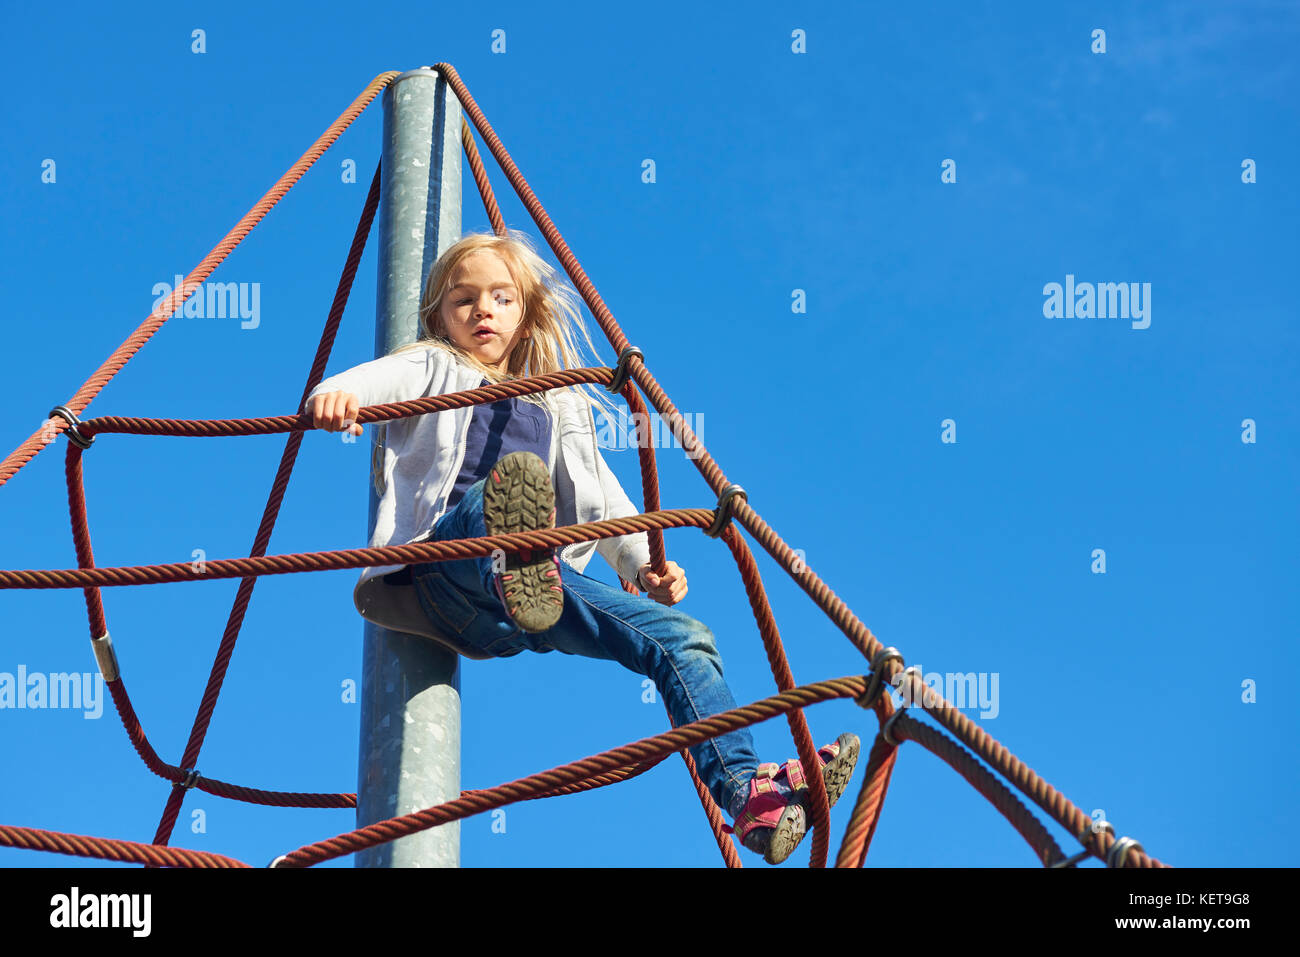 Active young child girl climbing the spider web playground activity. Children outdoor activities. Stock Photo